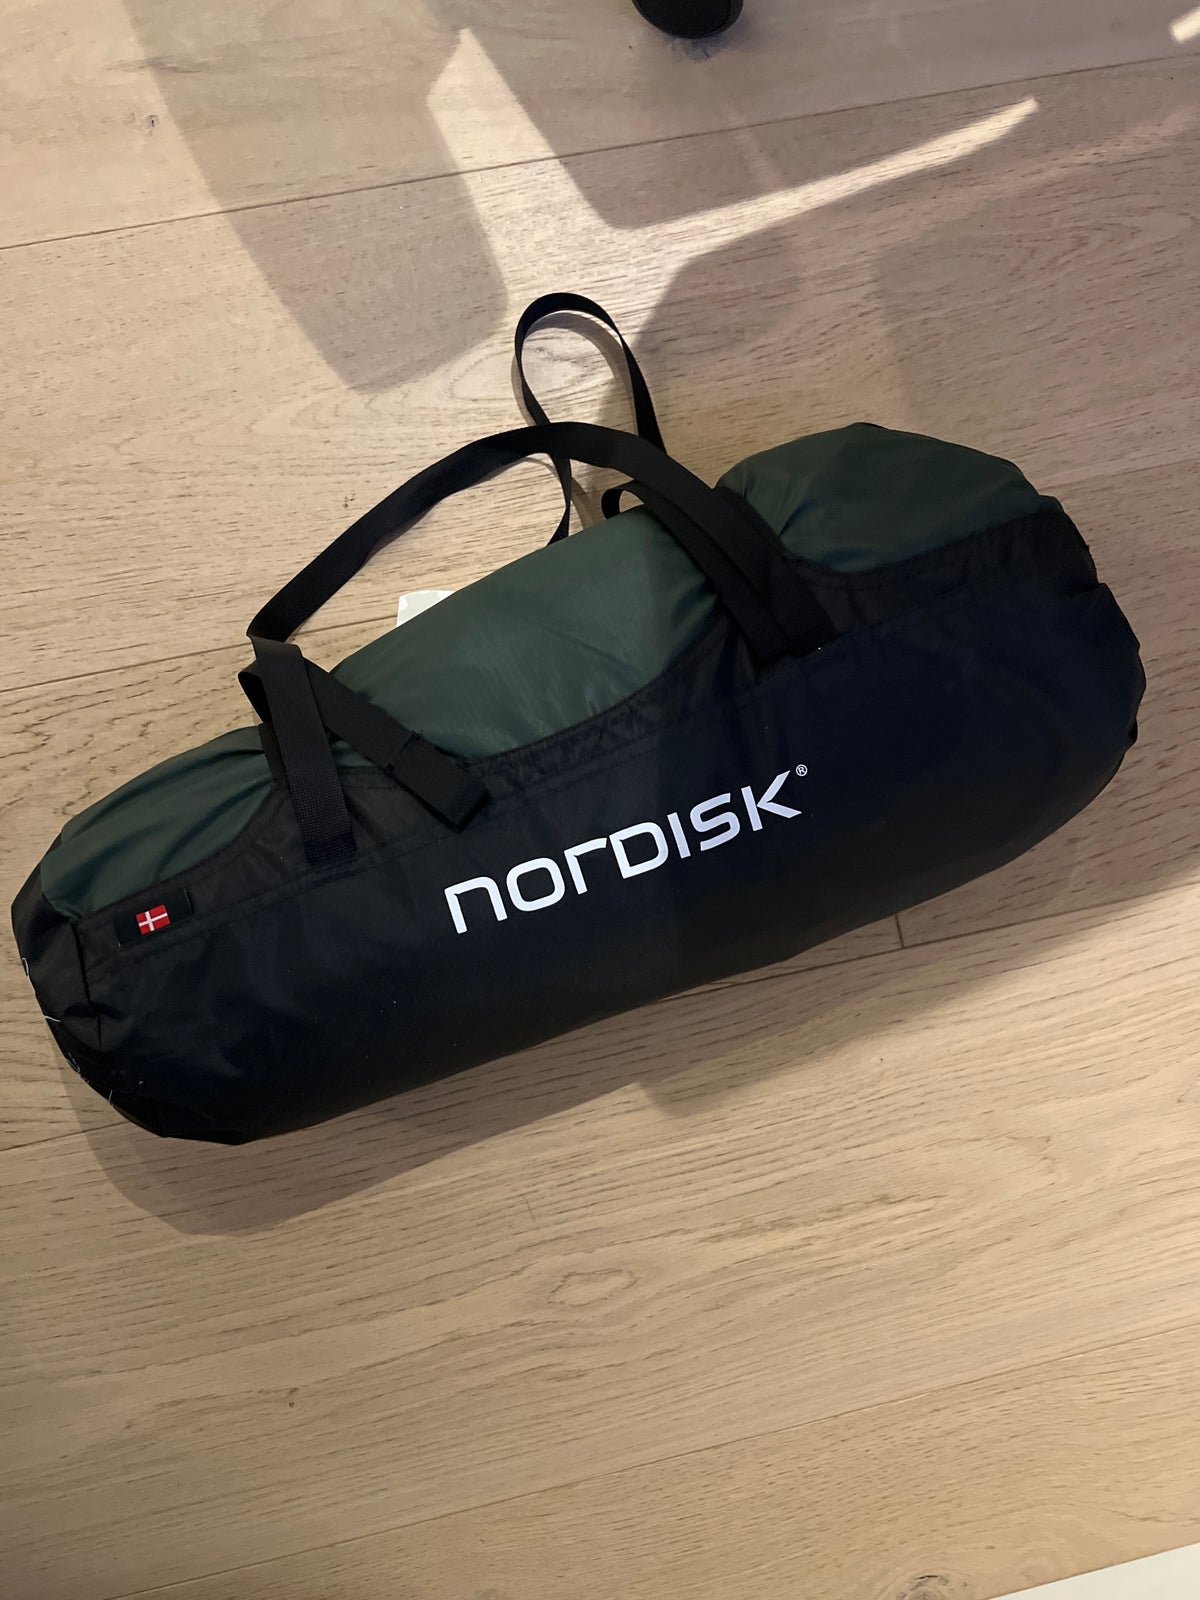 Nordisk oppland 2 si